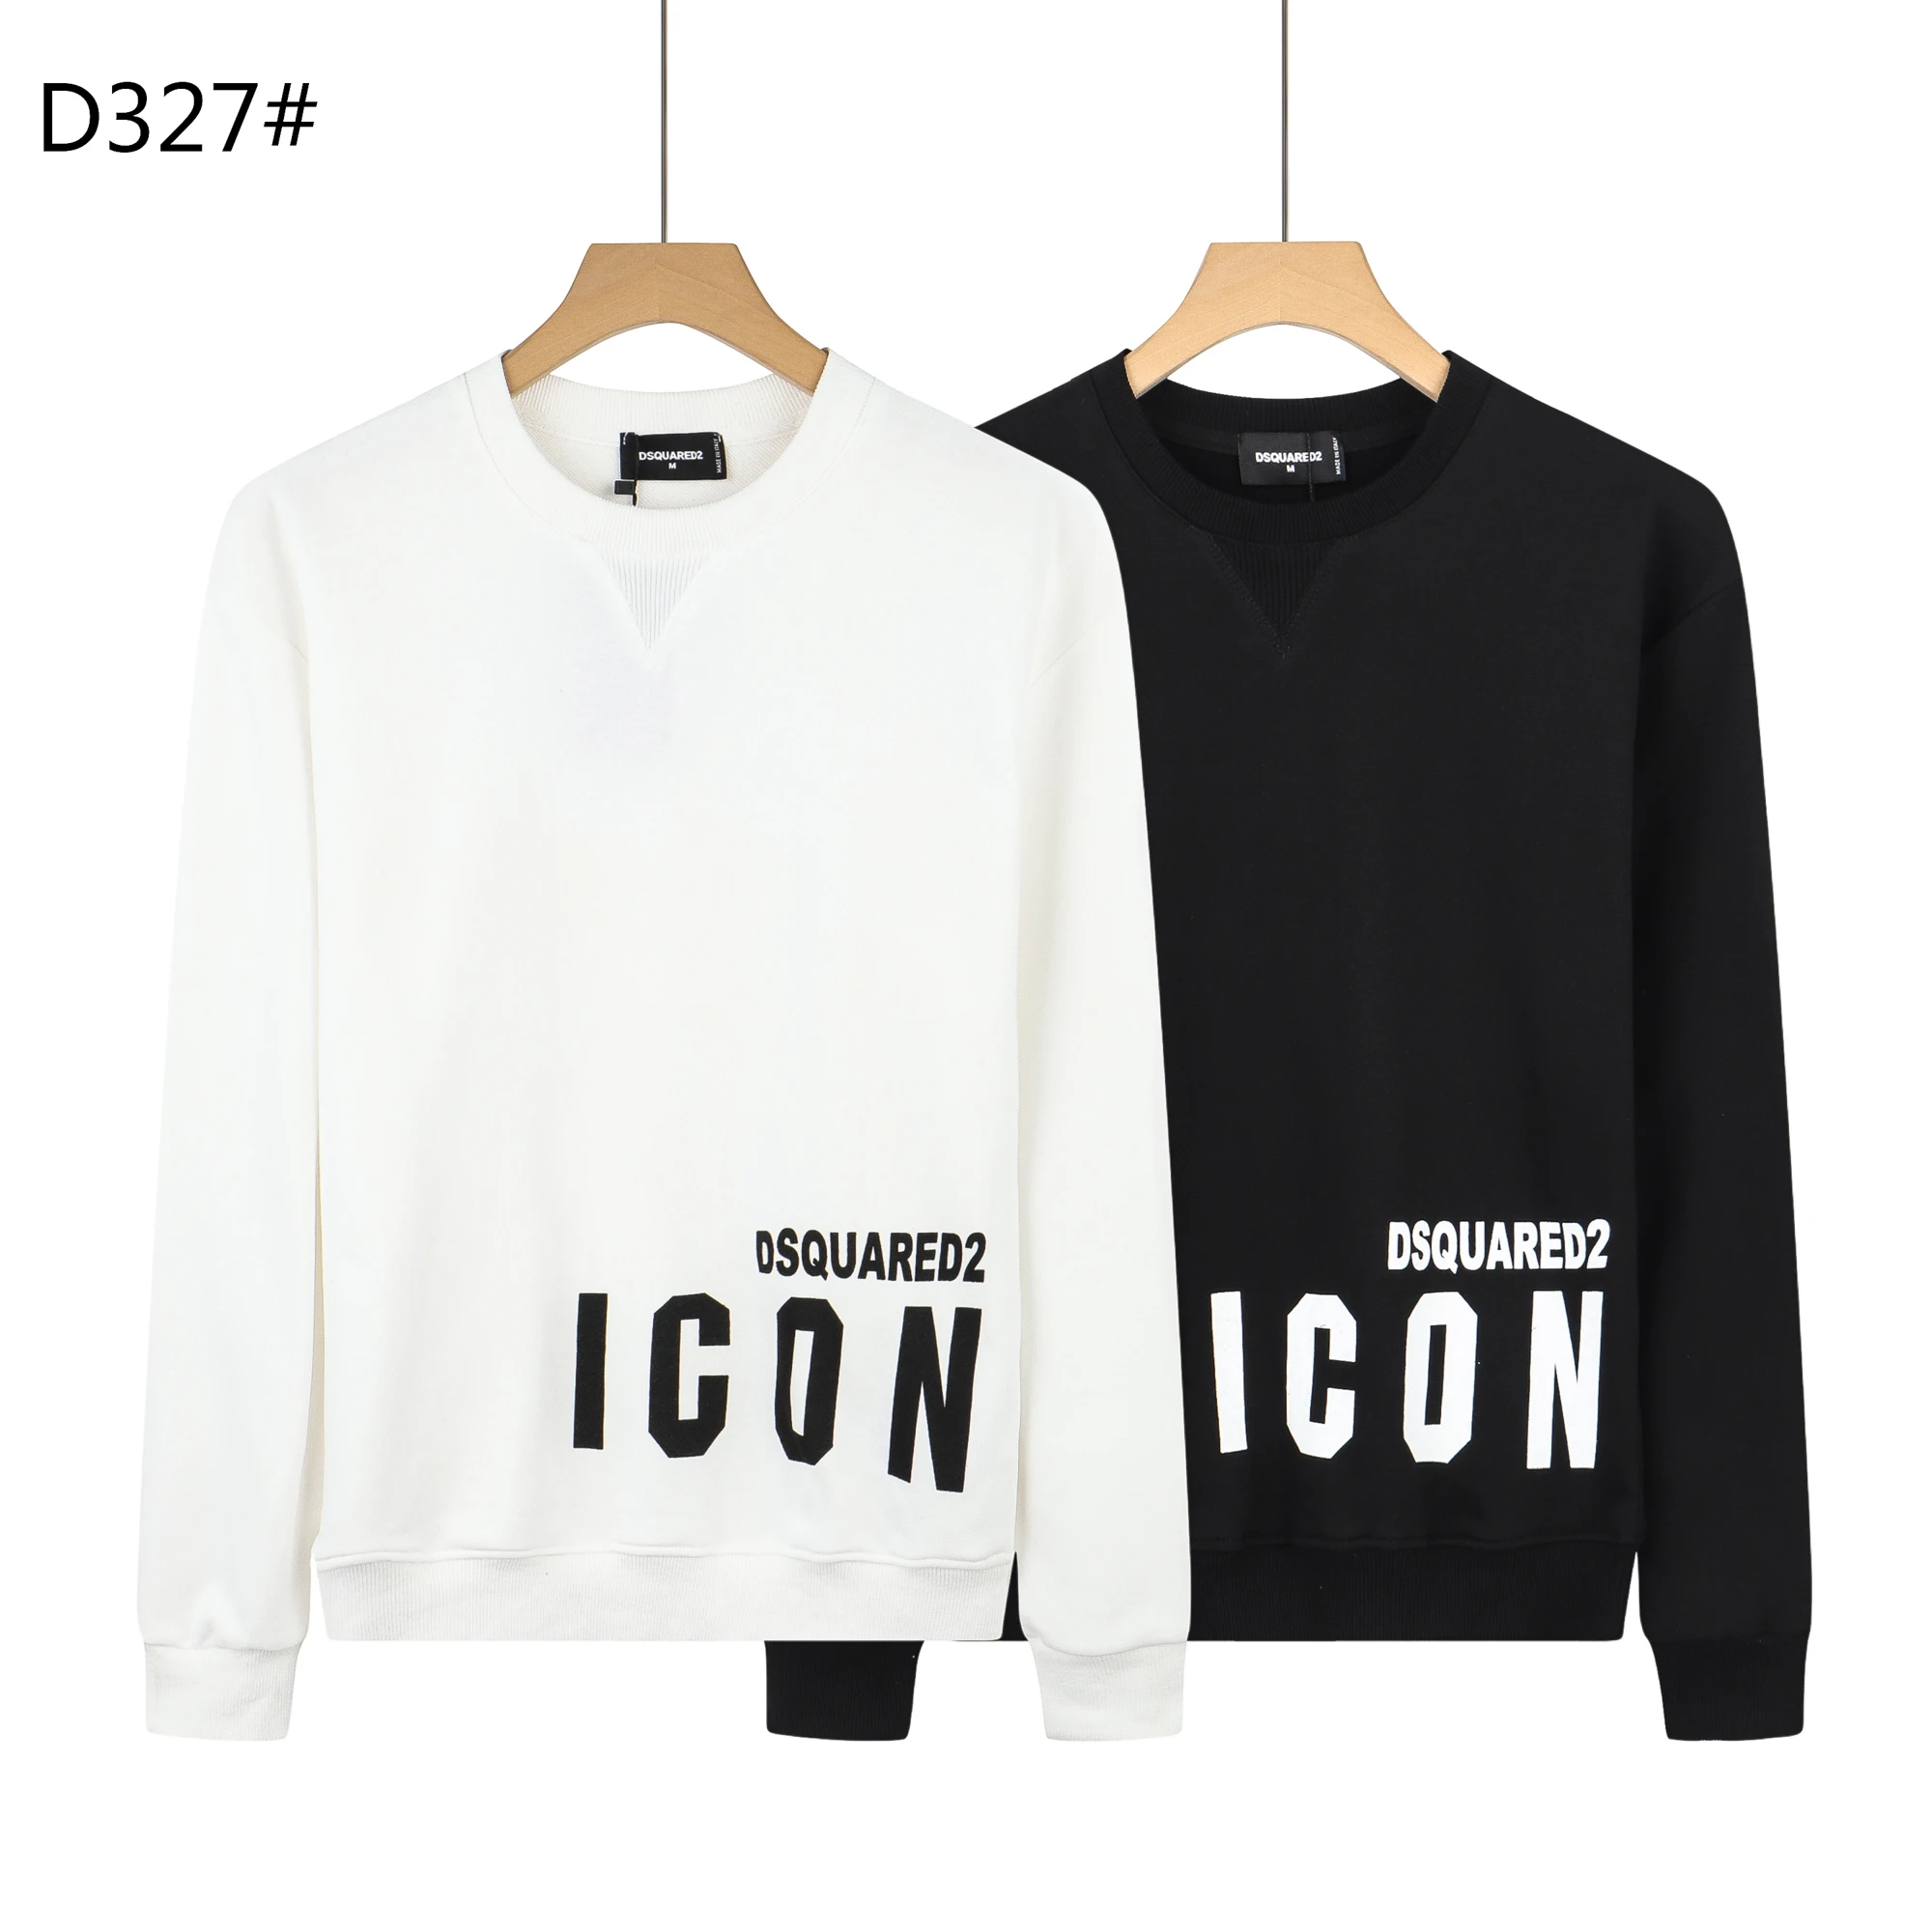 

ICON Printed Mens Casual Pullover Hoodies Sweatshirt Coats Man Dsquared2 Round Neck Cotton Hoodies Tracksuits Big Size M TO XXXL